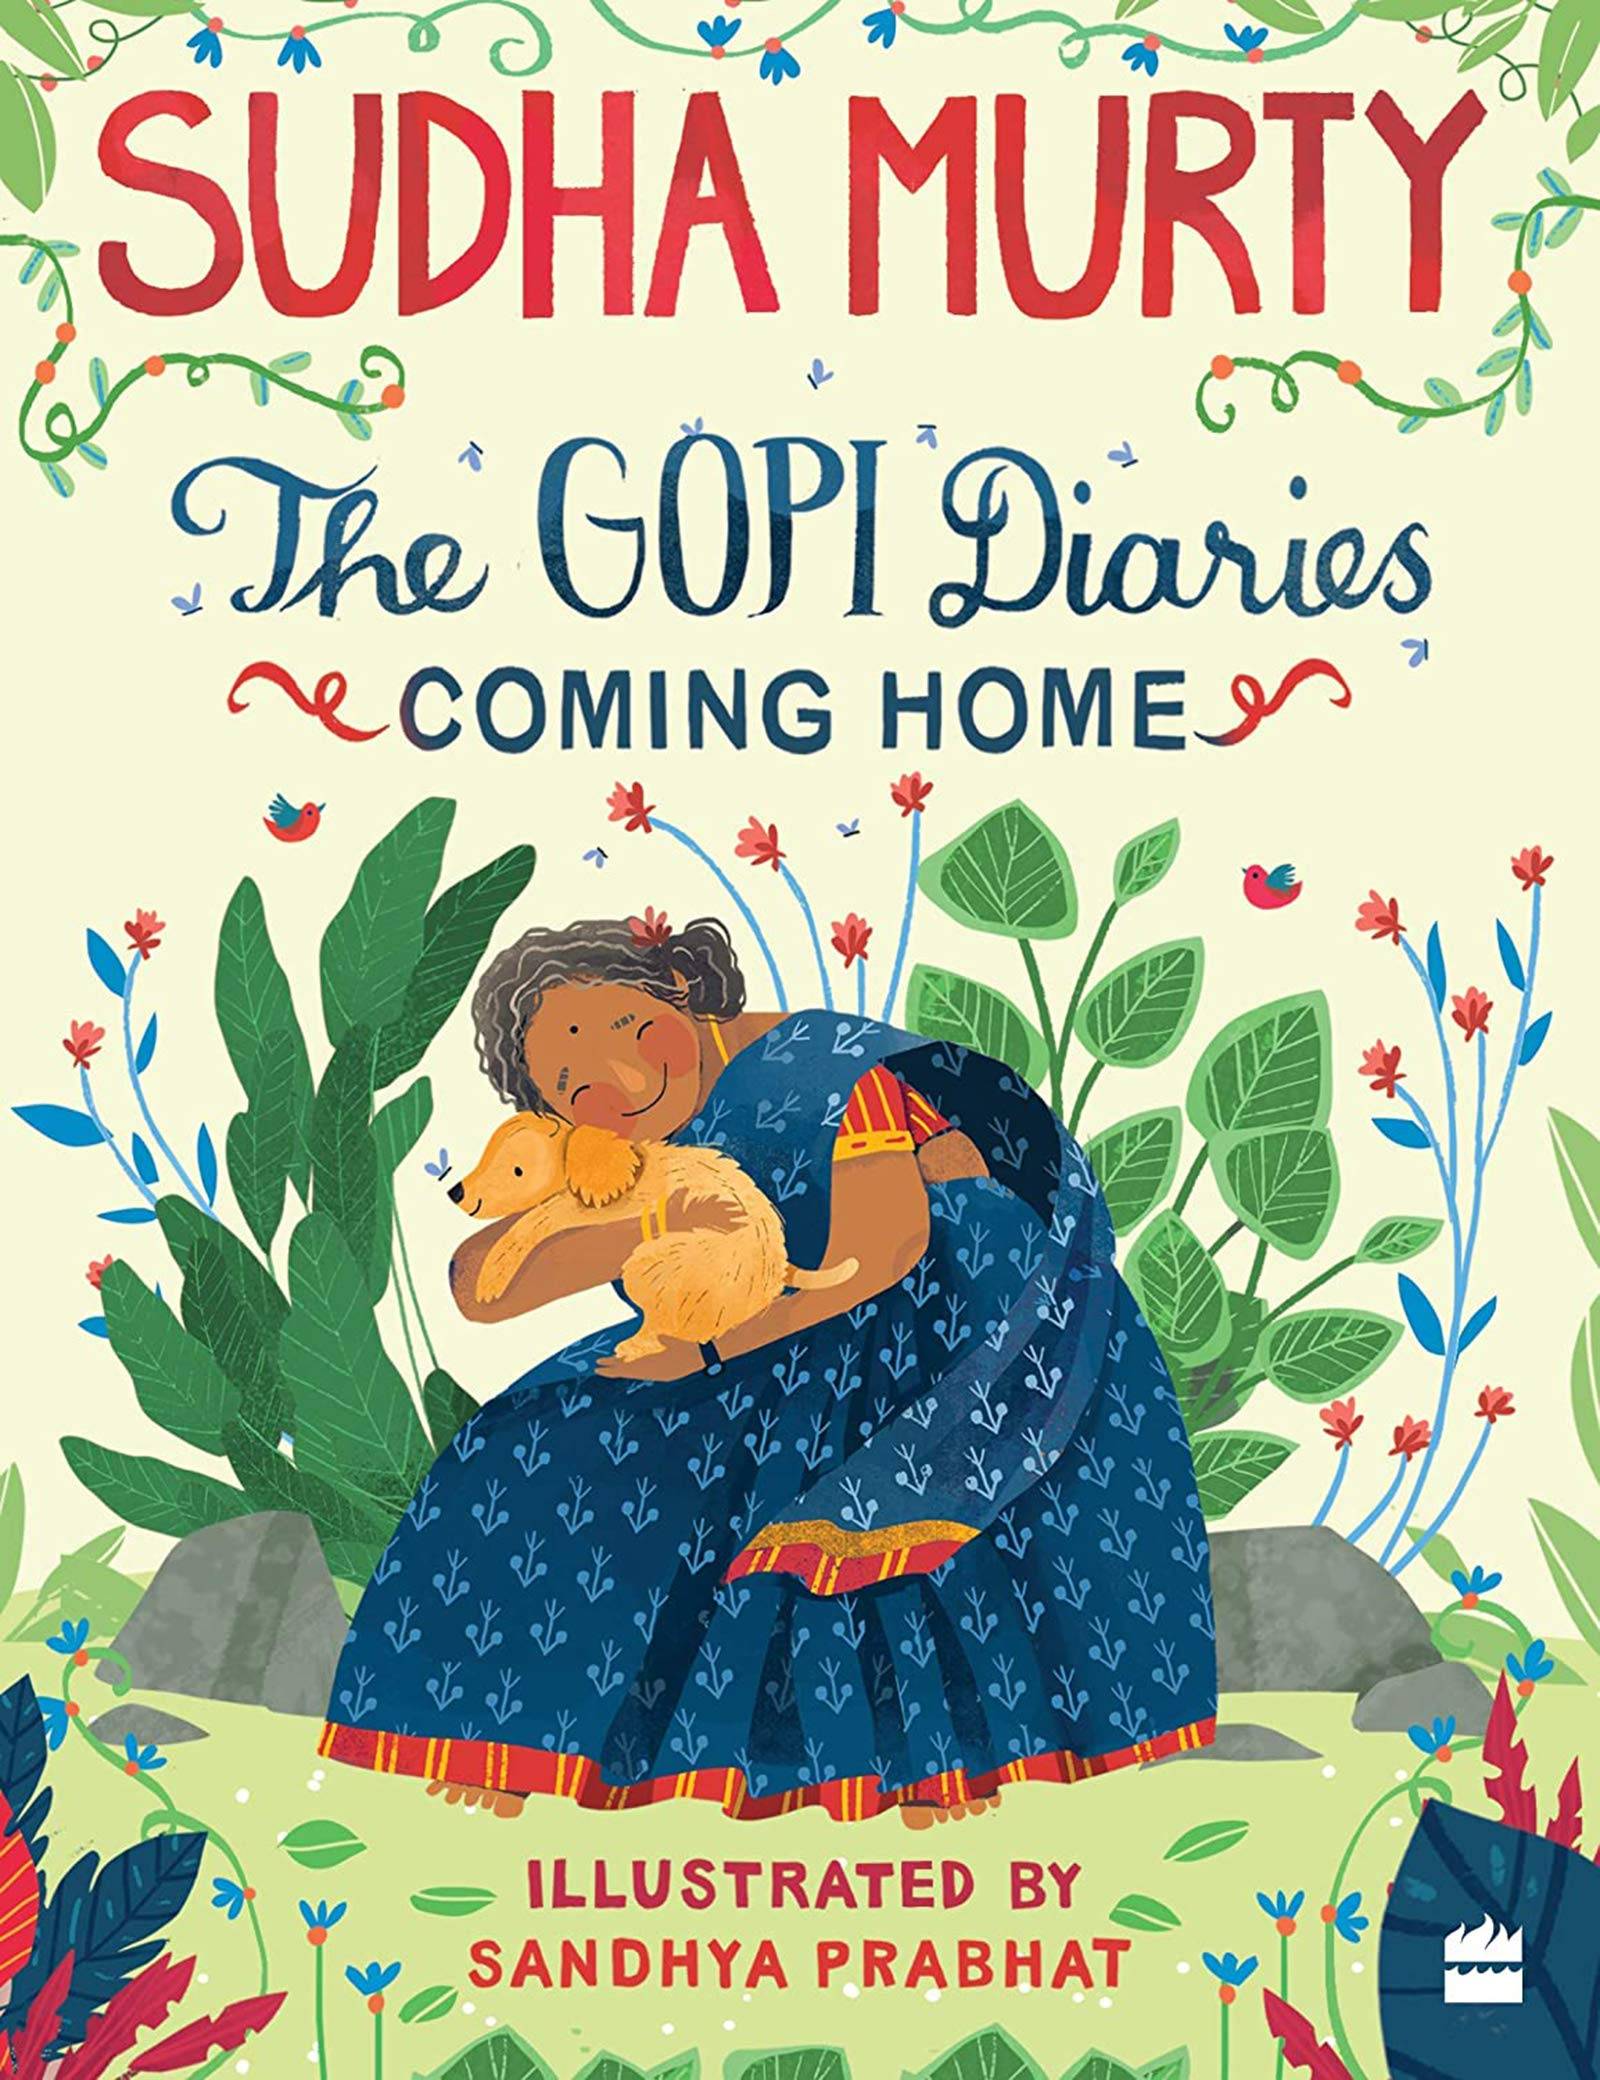 IMG : The Gopi Diaries coming Home